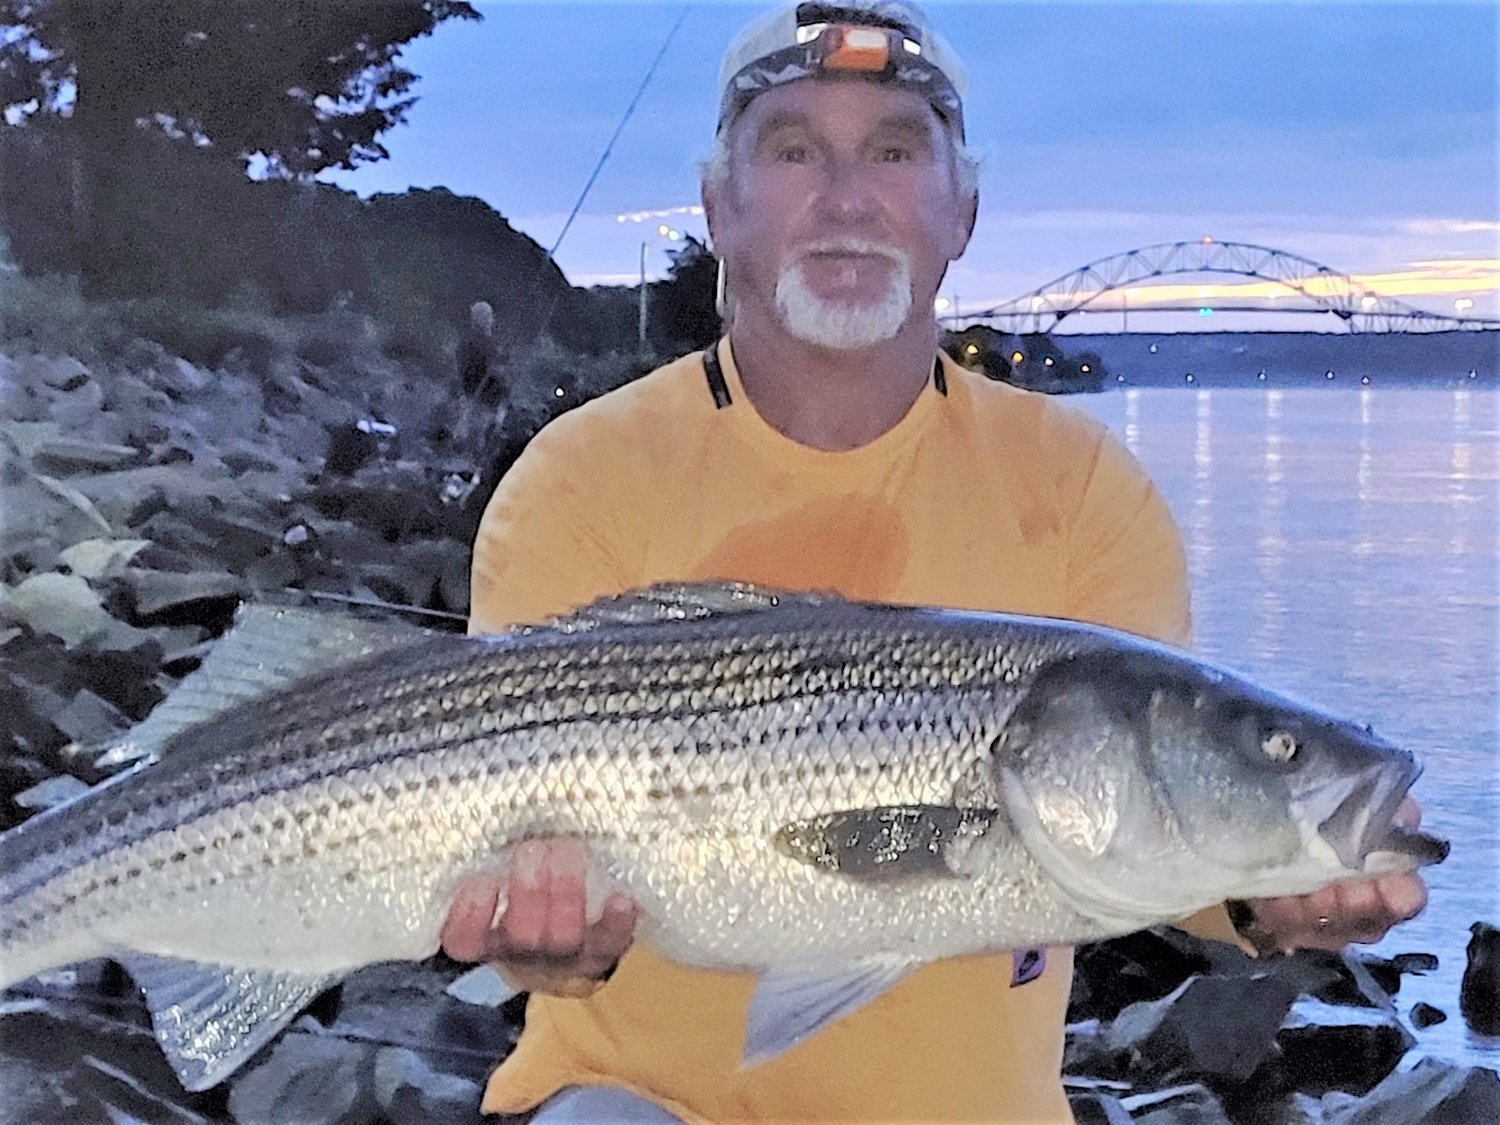 Blake Webster tautog – Photo B
Kenny Nevens of Bourne caught this 41 inch striped bass on a green Fish Lab Mac Attack at first light on a Cape Cod Canal west rising tide. Photo courtesy of East End Eddie Doherty.